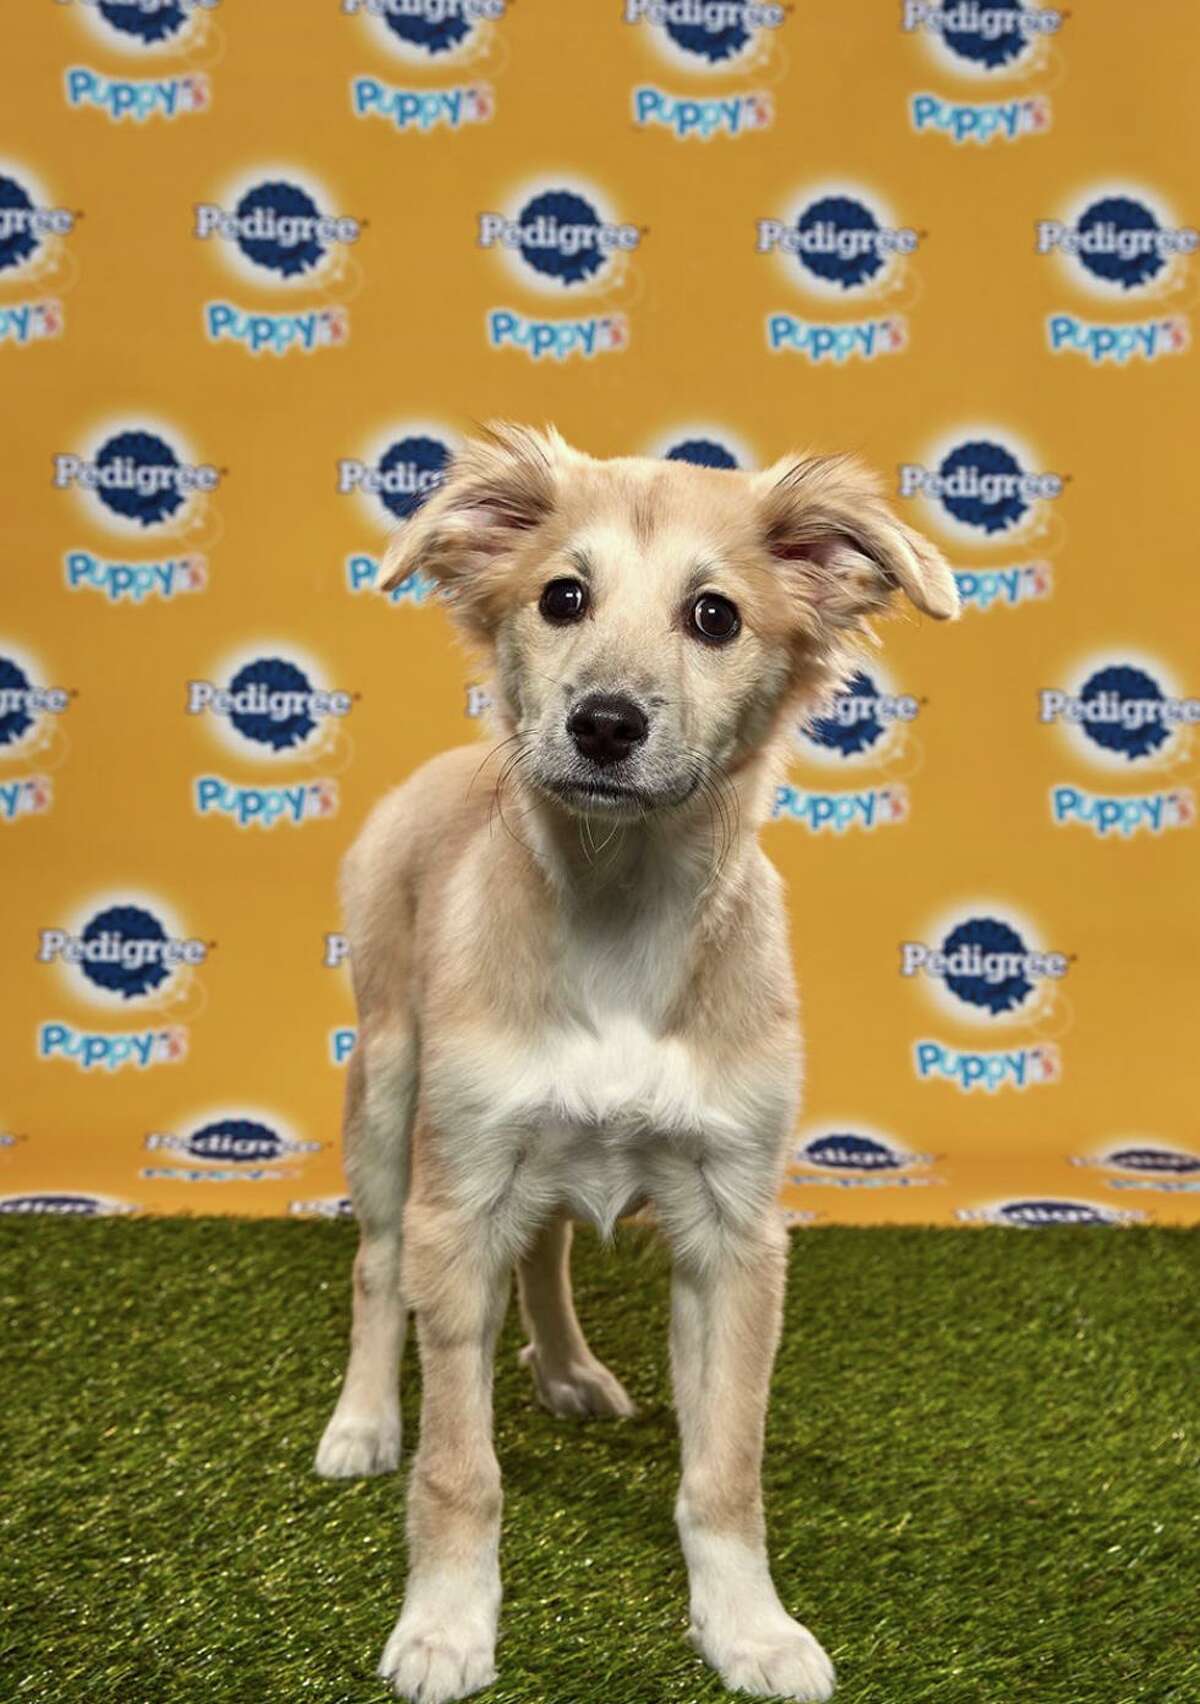 Starla will be playing for Team Ruff at the Puppy Bowl on Feb. 2. The show will air on Animal Planet at 3 p.m. Starla is a rescue from the Danbury Animal Welfare Society.